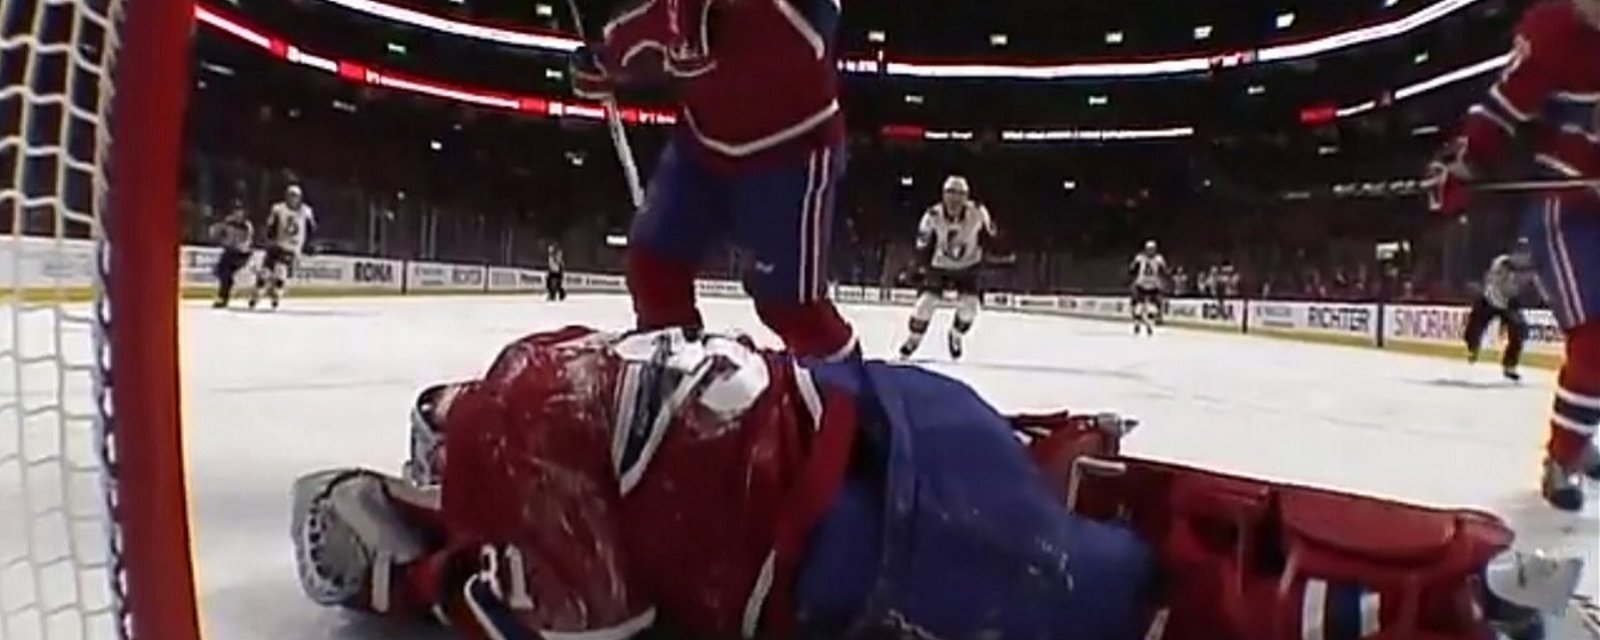 Breaking: Carey Price goes down after taking a cross-check to the head. 